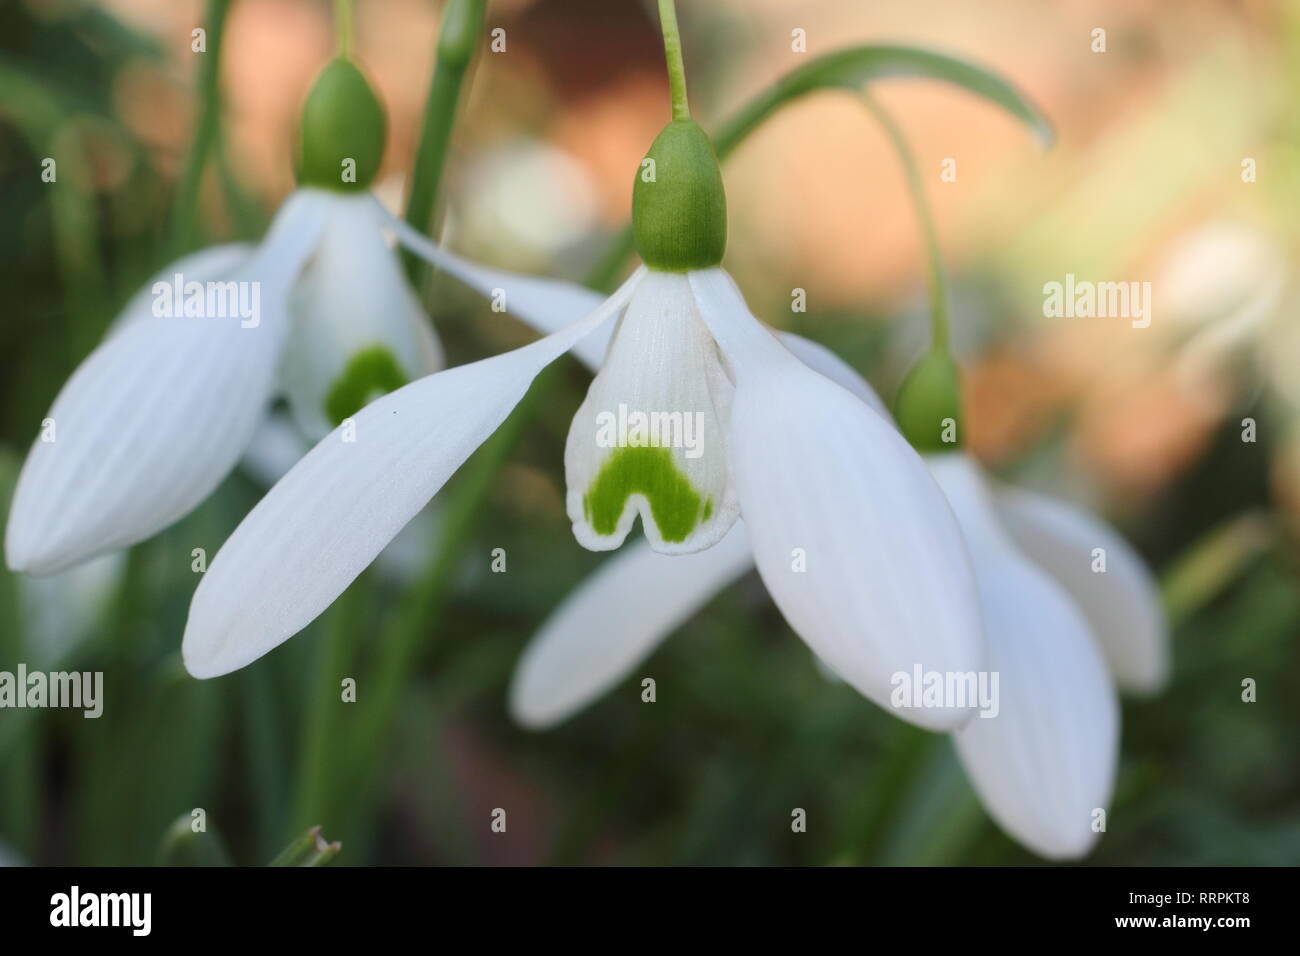 Galanthus 'Magnet snowdrop blooms in a winter garden, UK. AGM Stock Photo